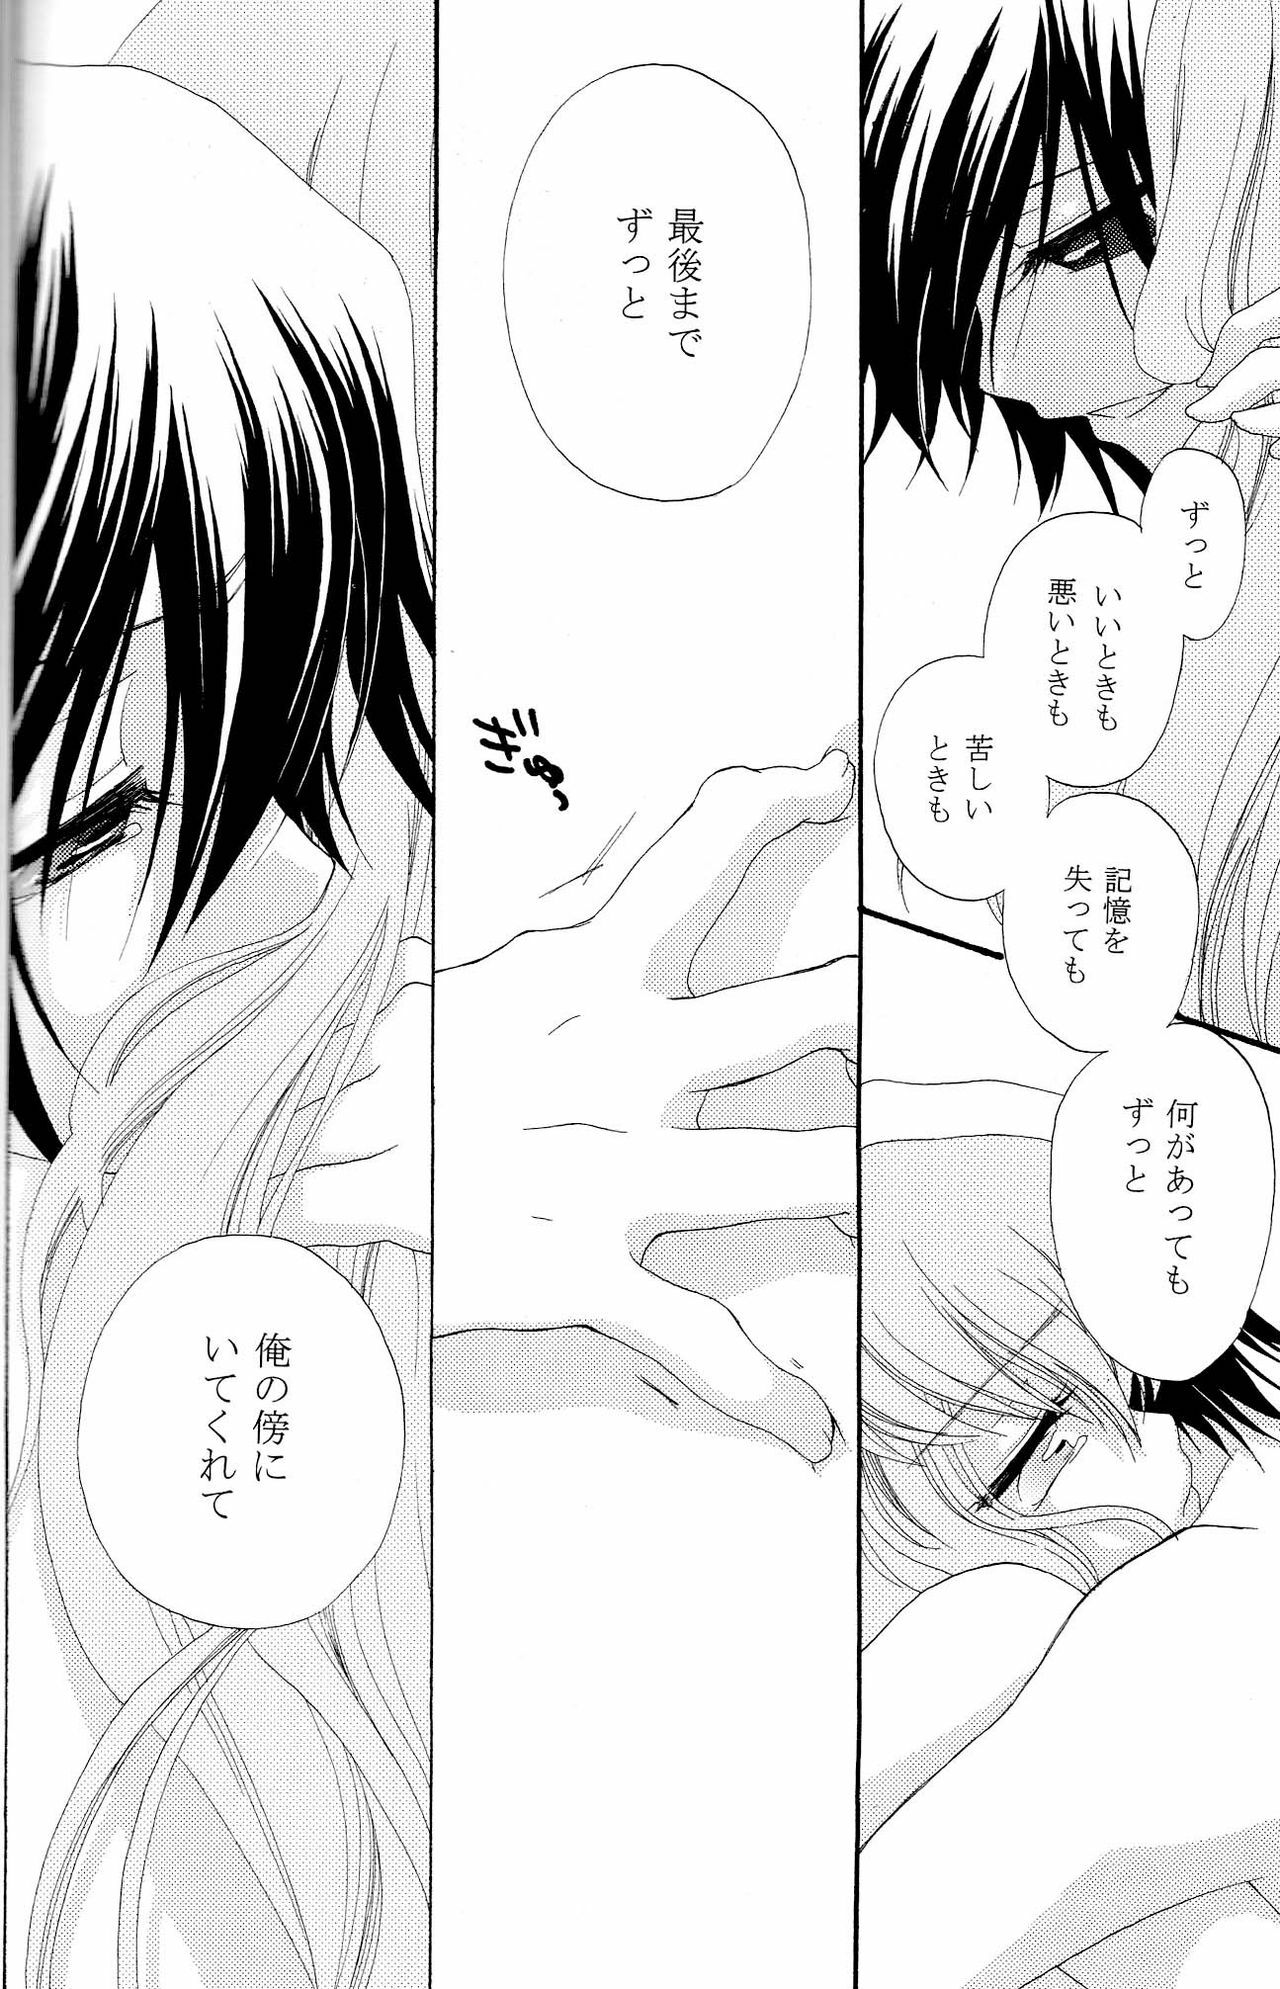 [APRICOT TEA] The last love letter presented to my dear only partner. (Code Geass) page 31 full